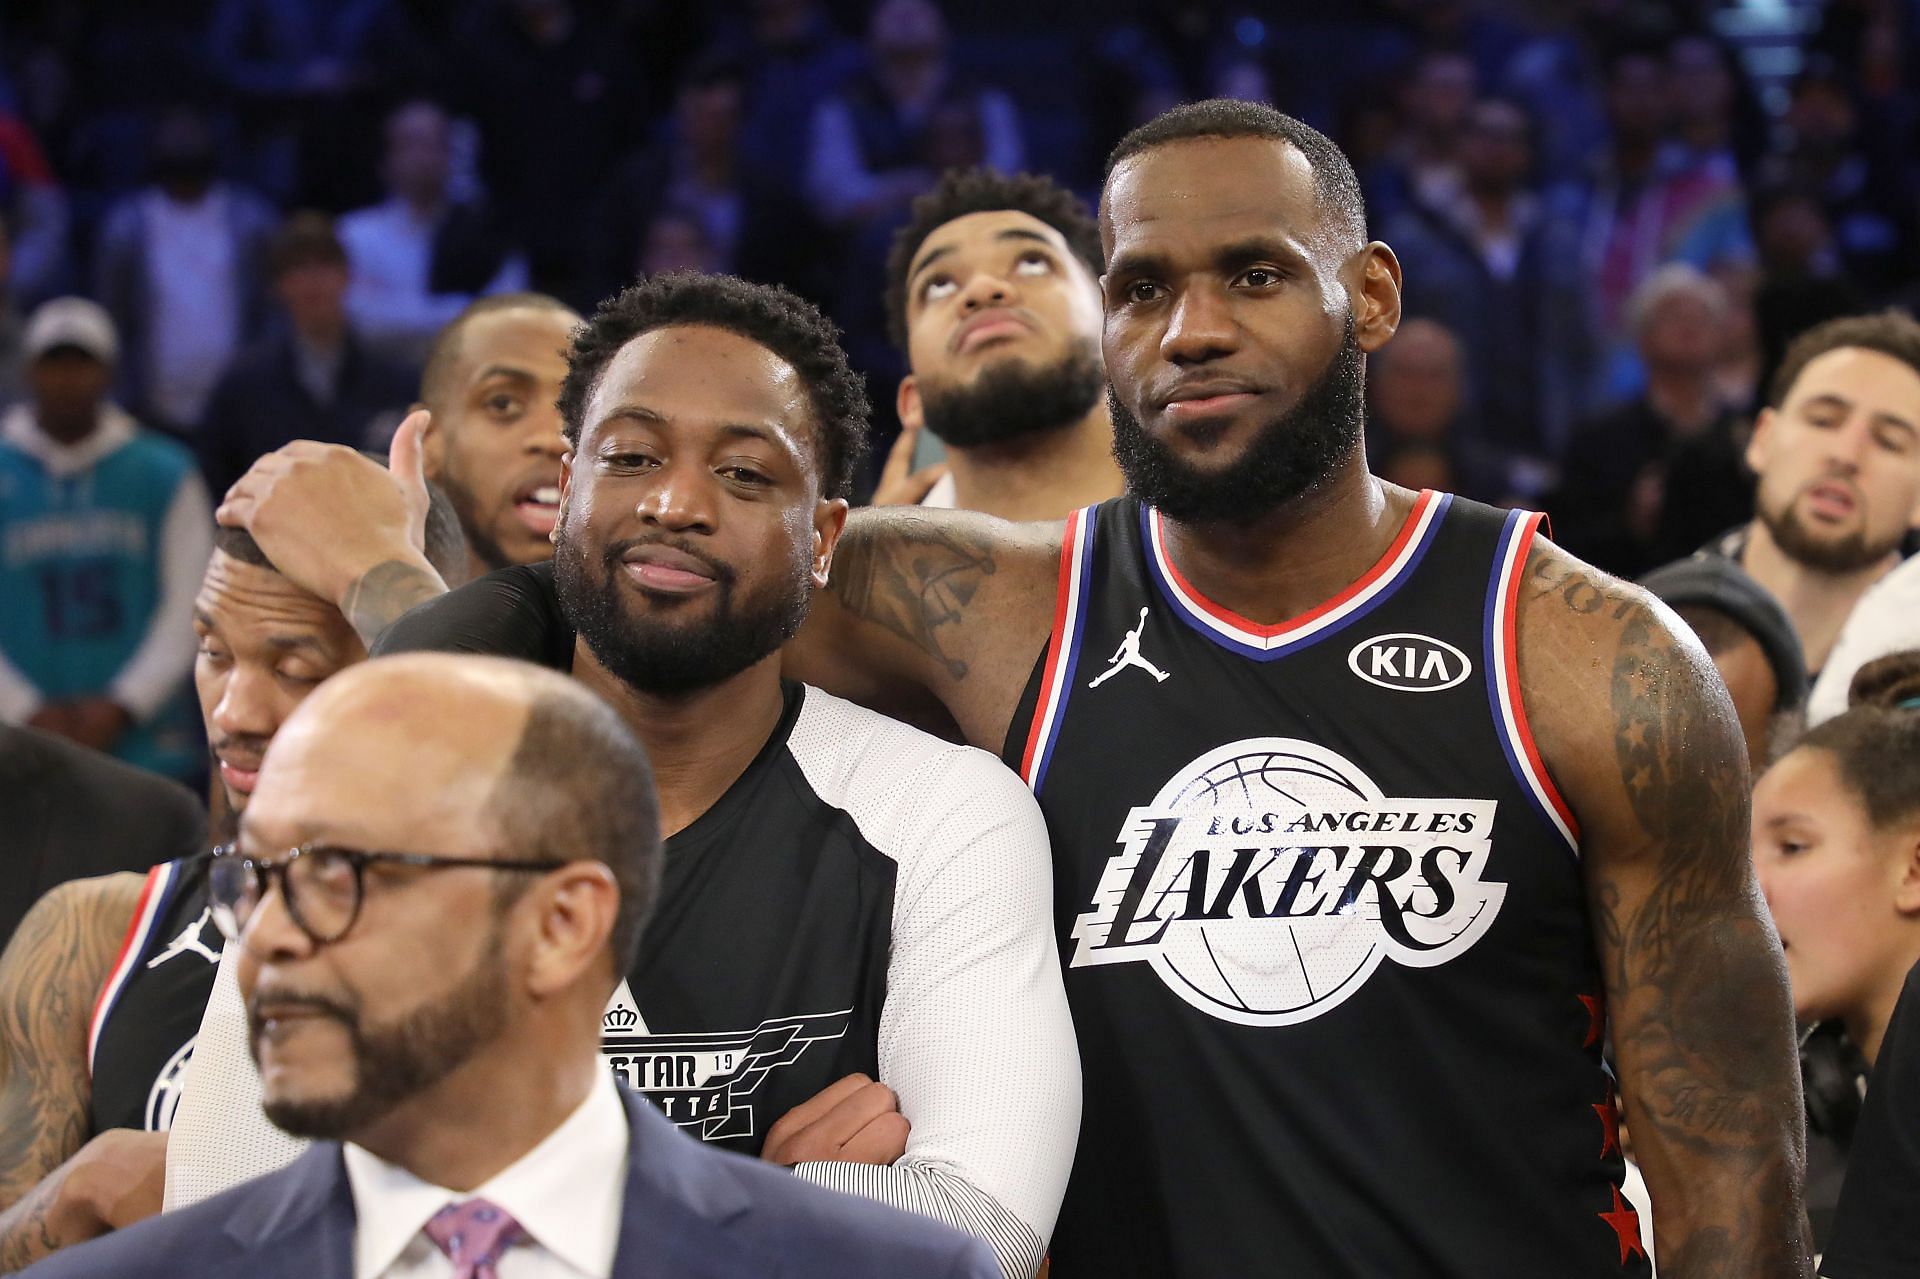 Dwyane Wade and LeBron James share a moment at the 2019 NBA All-Star Game